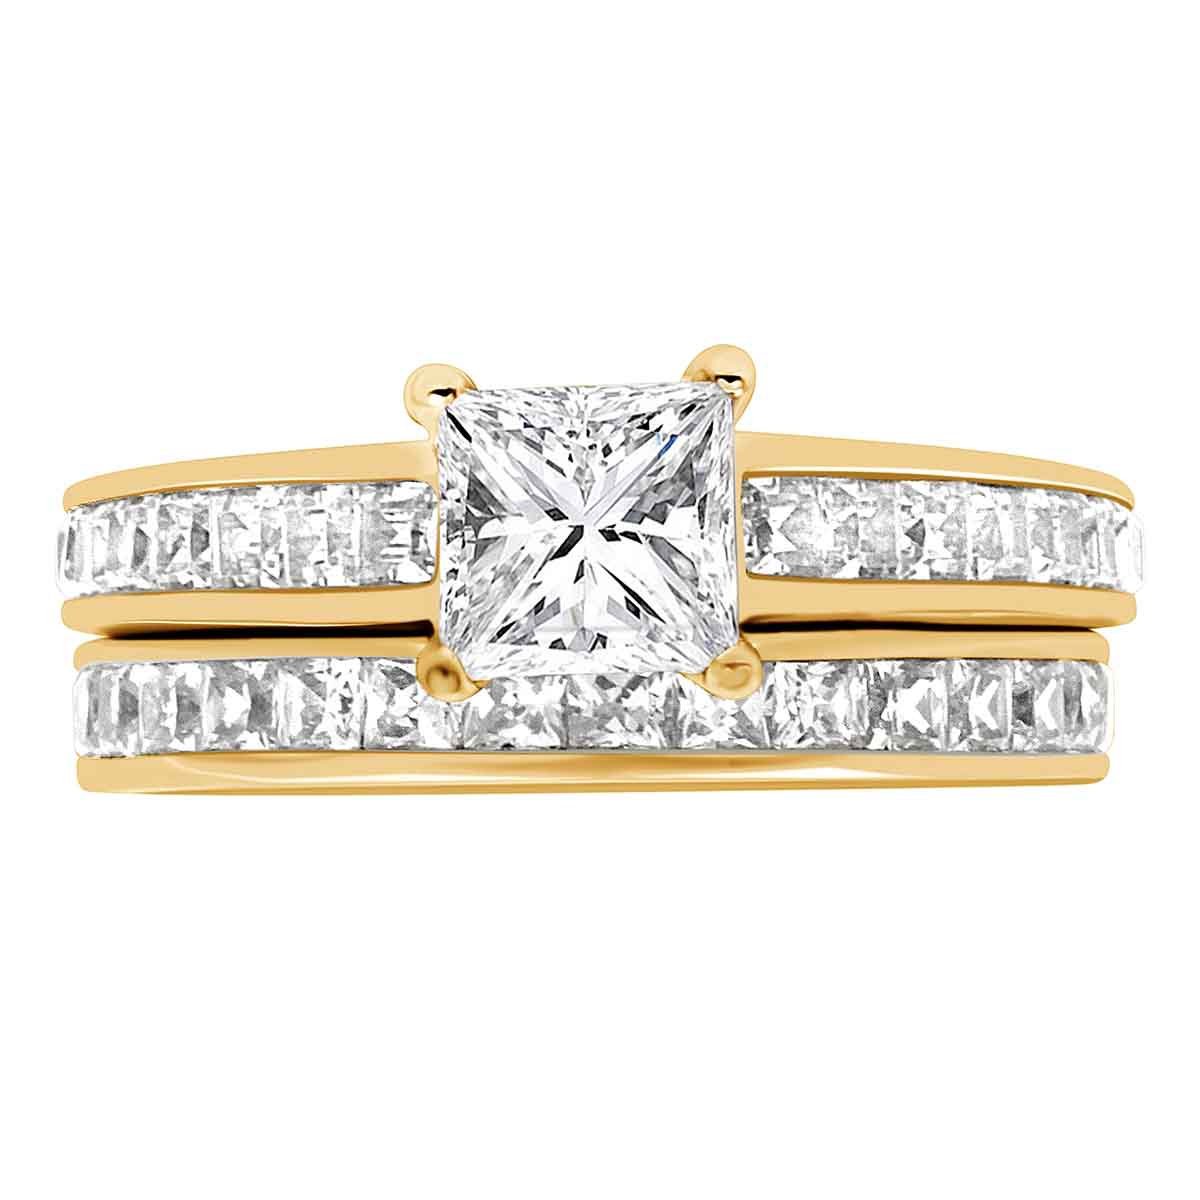 Princess Shape Diamond Ring made from yellow gold pictured with a diamond wedding ring